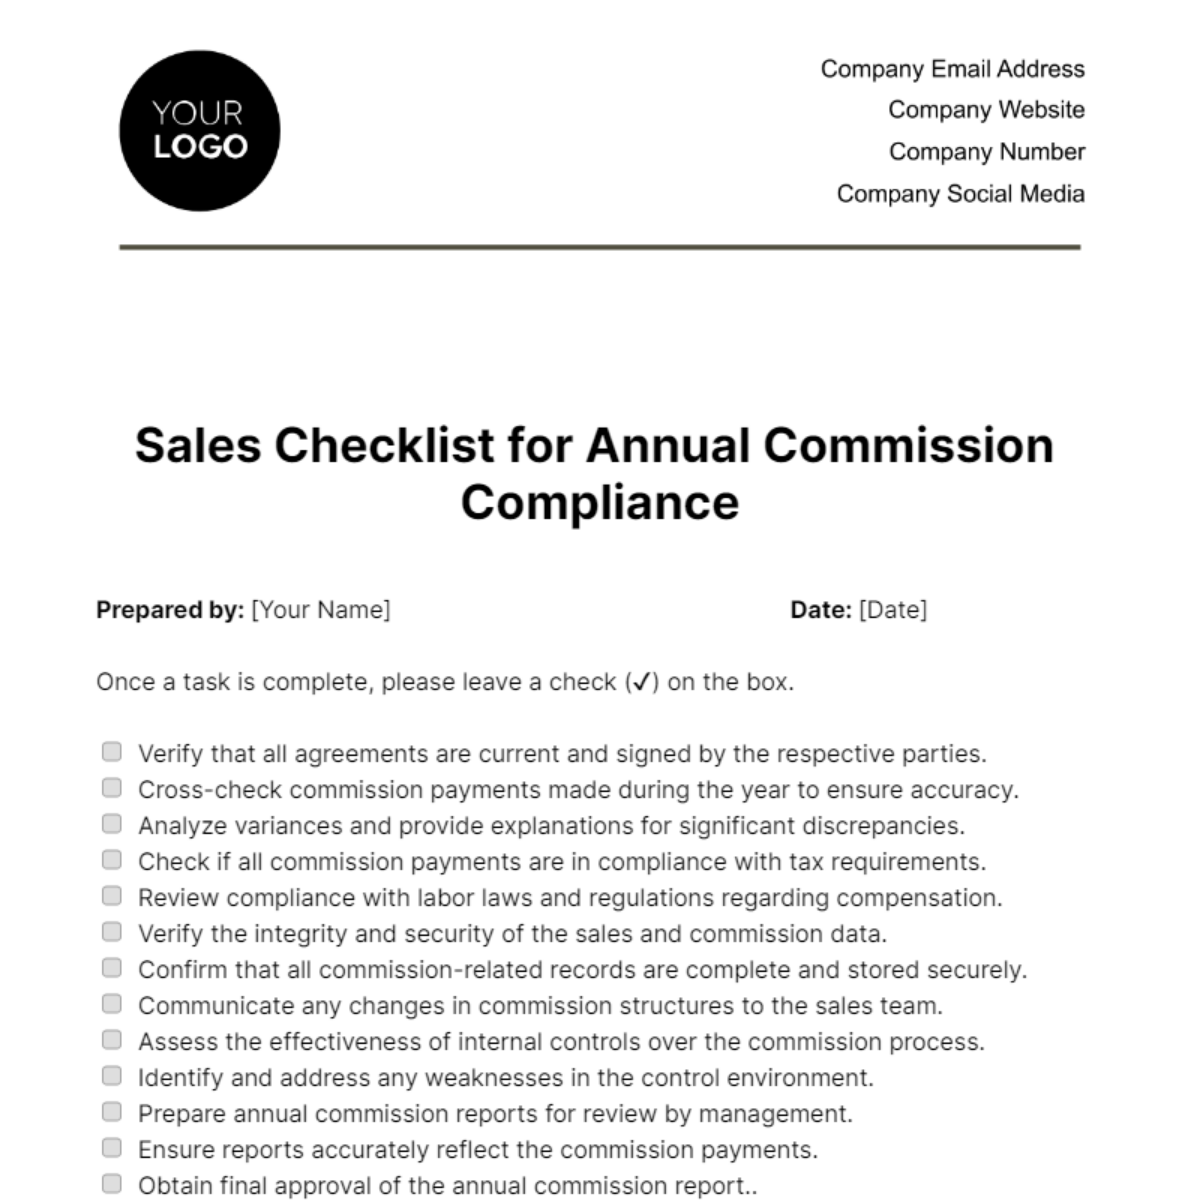 Sales Checklist for Annual Commission Compliance Template